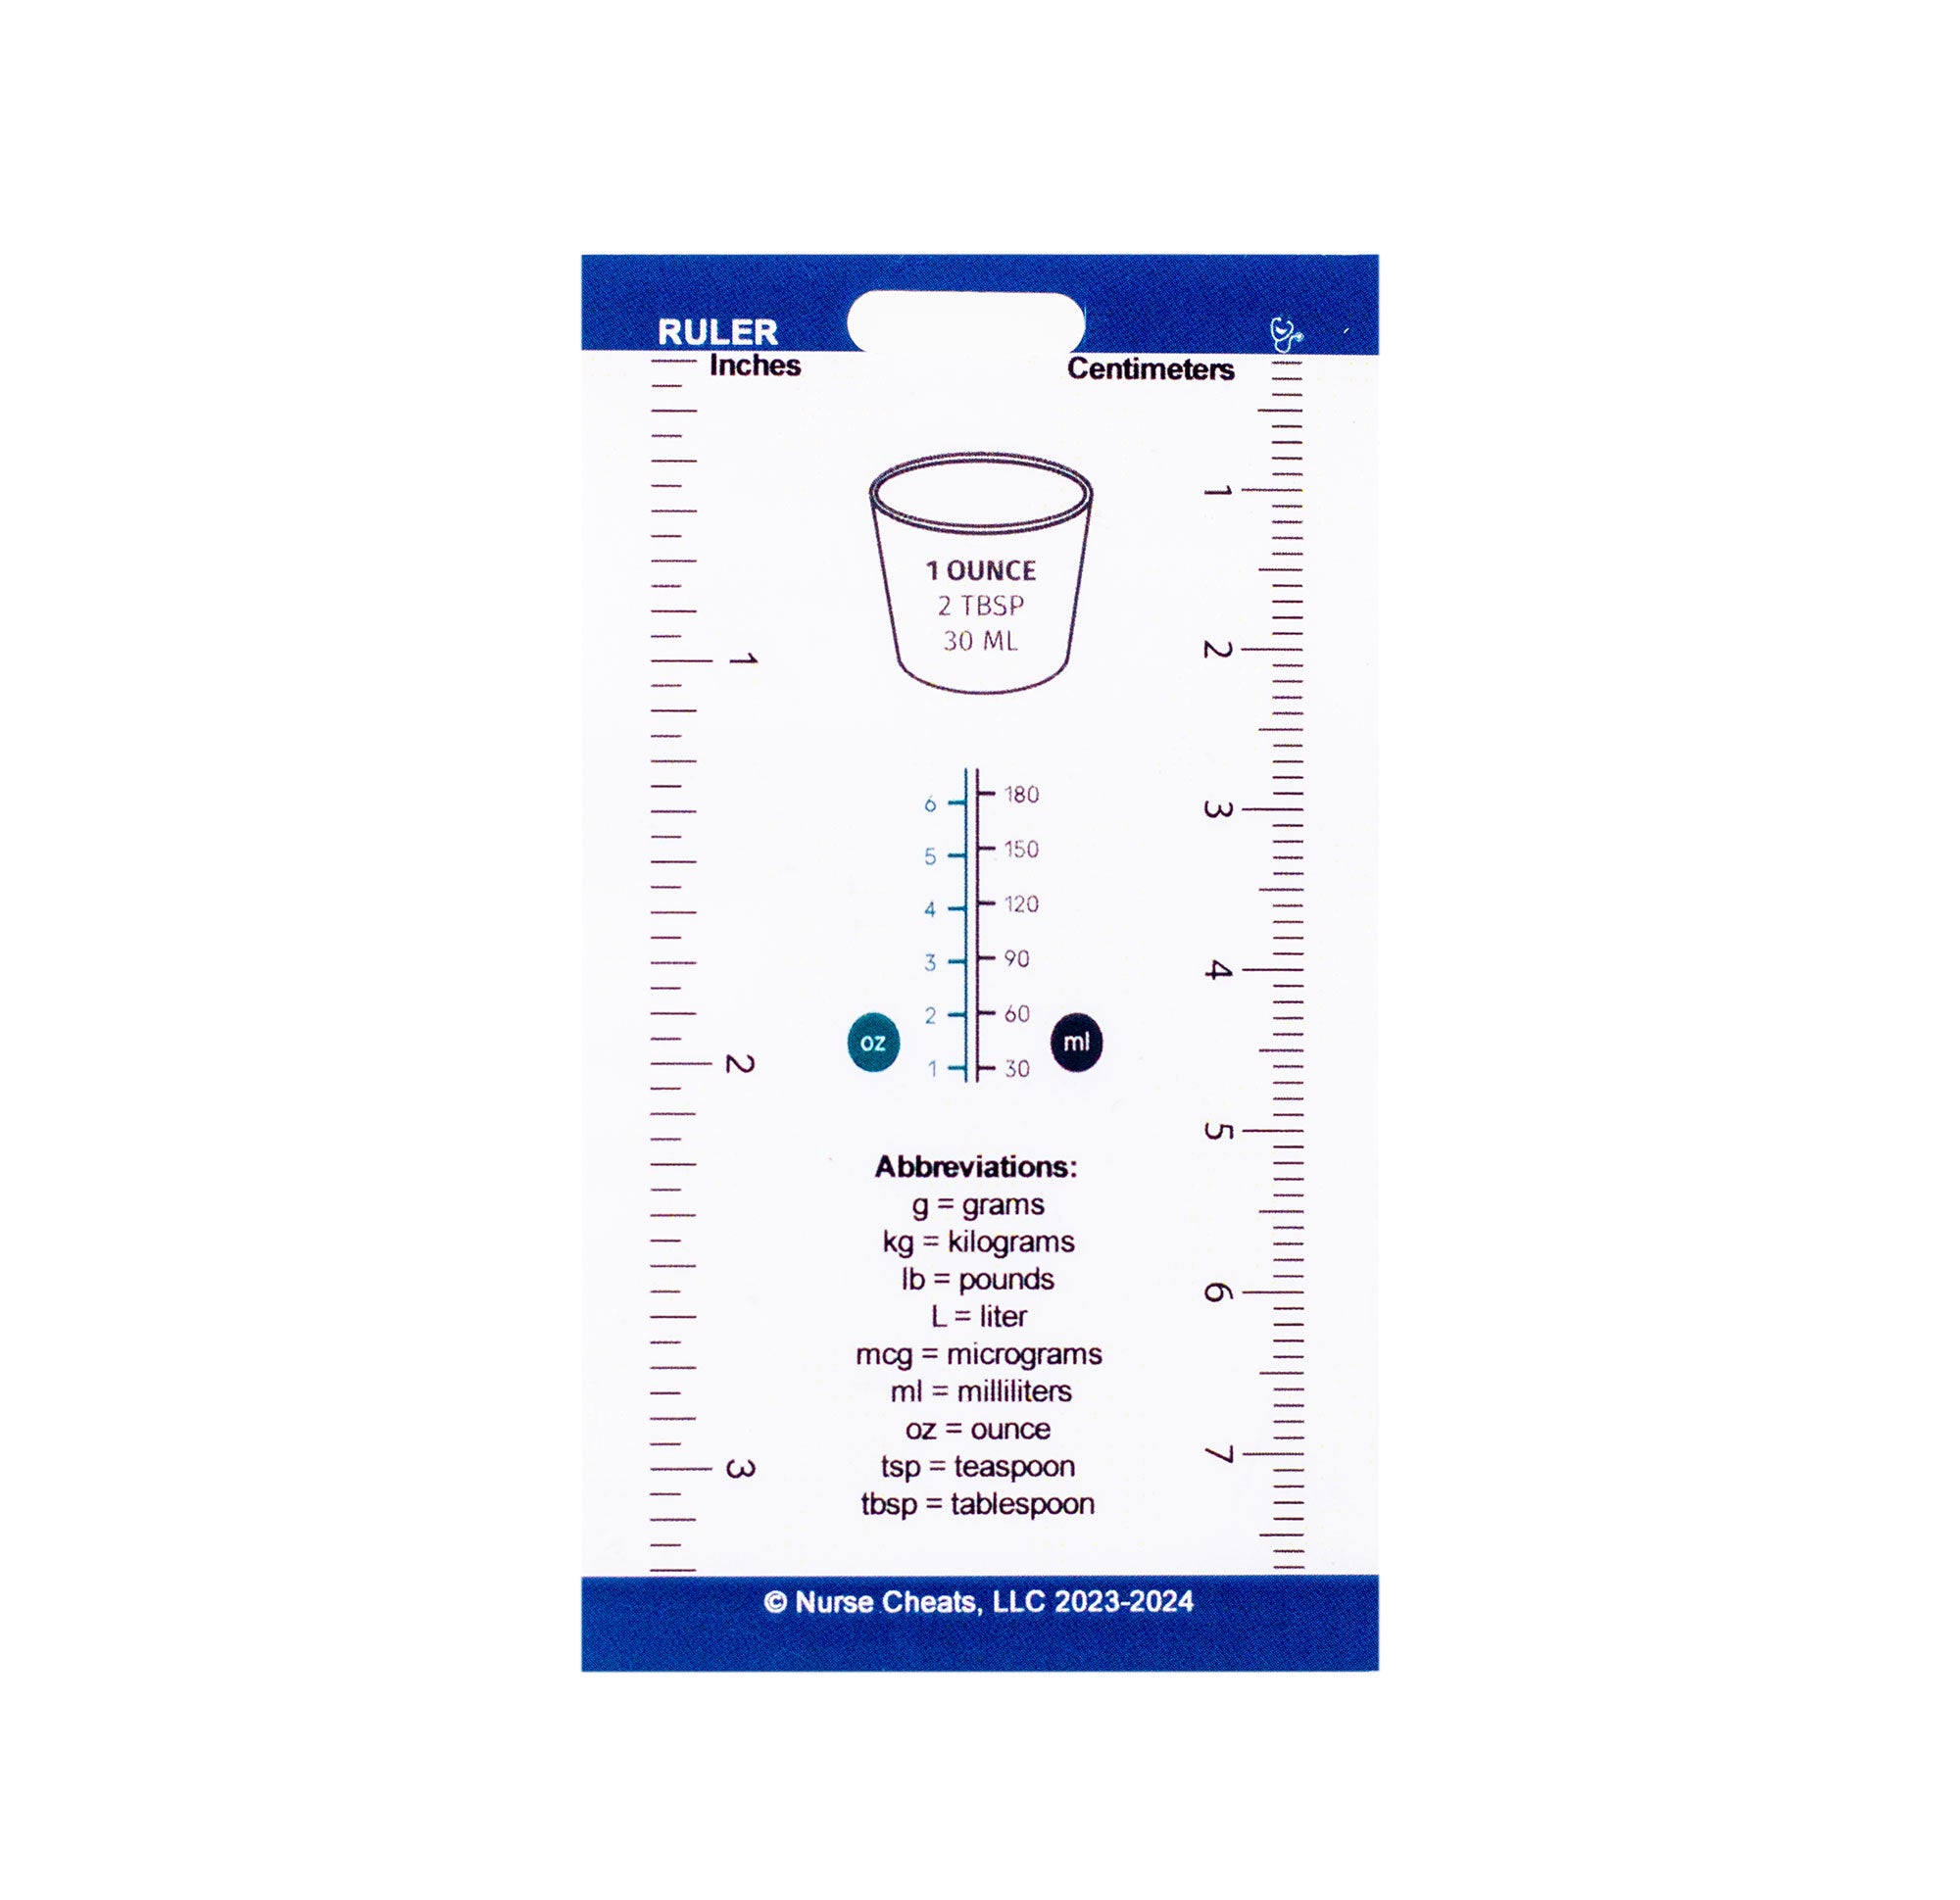 The front of our badge ruler contains inches (3.5") and centimeters (8.5 cm) as well as liquid conversions, abbreviations and oz to ml.